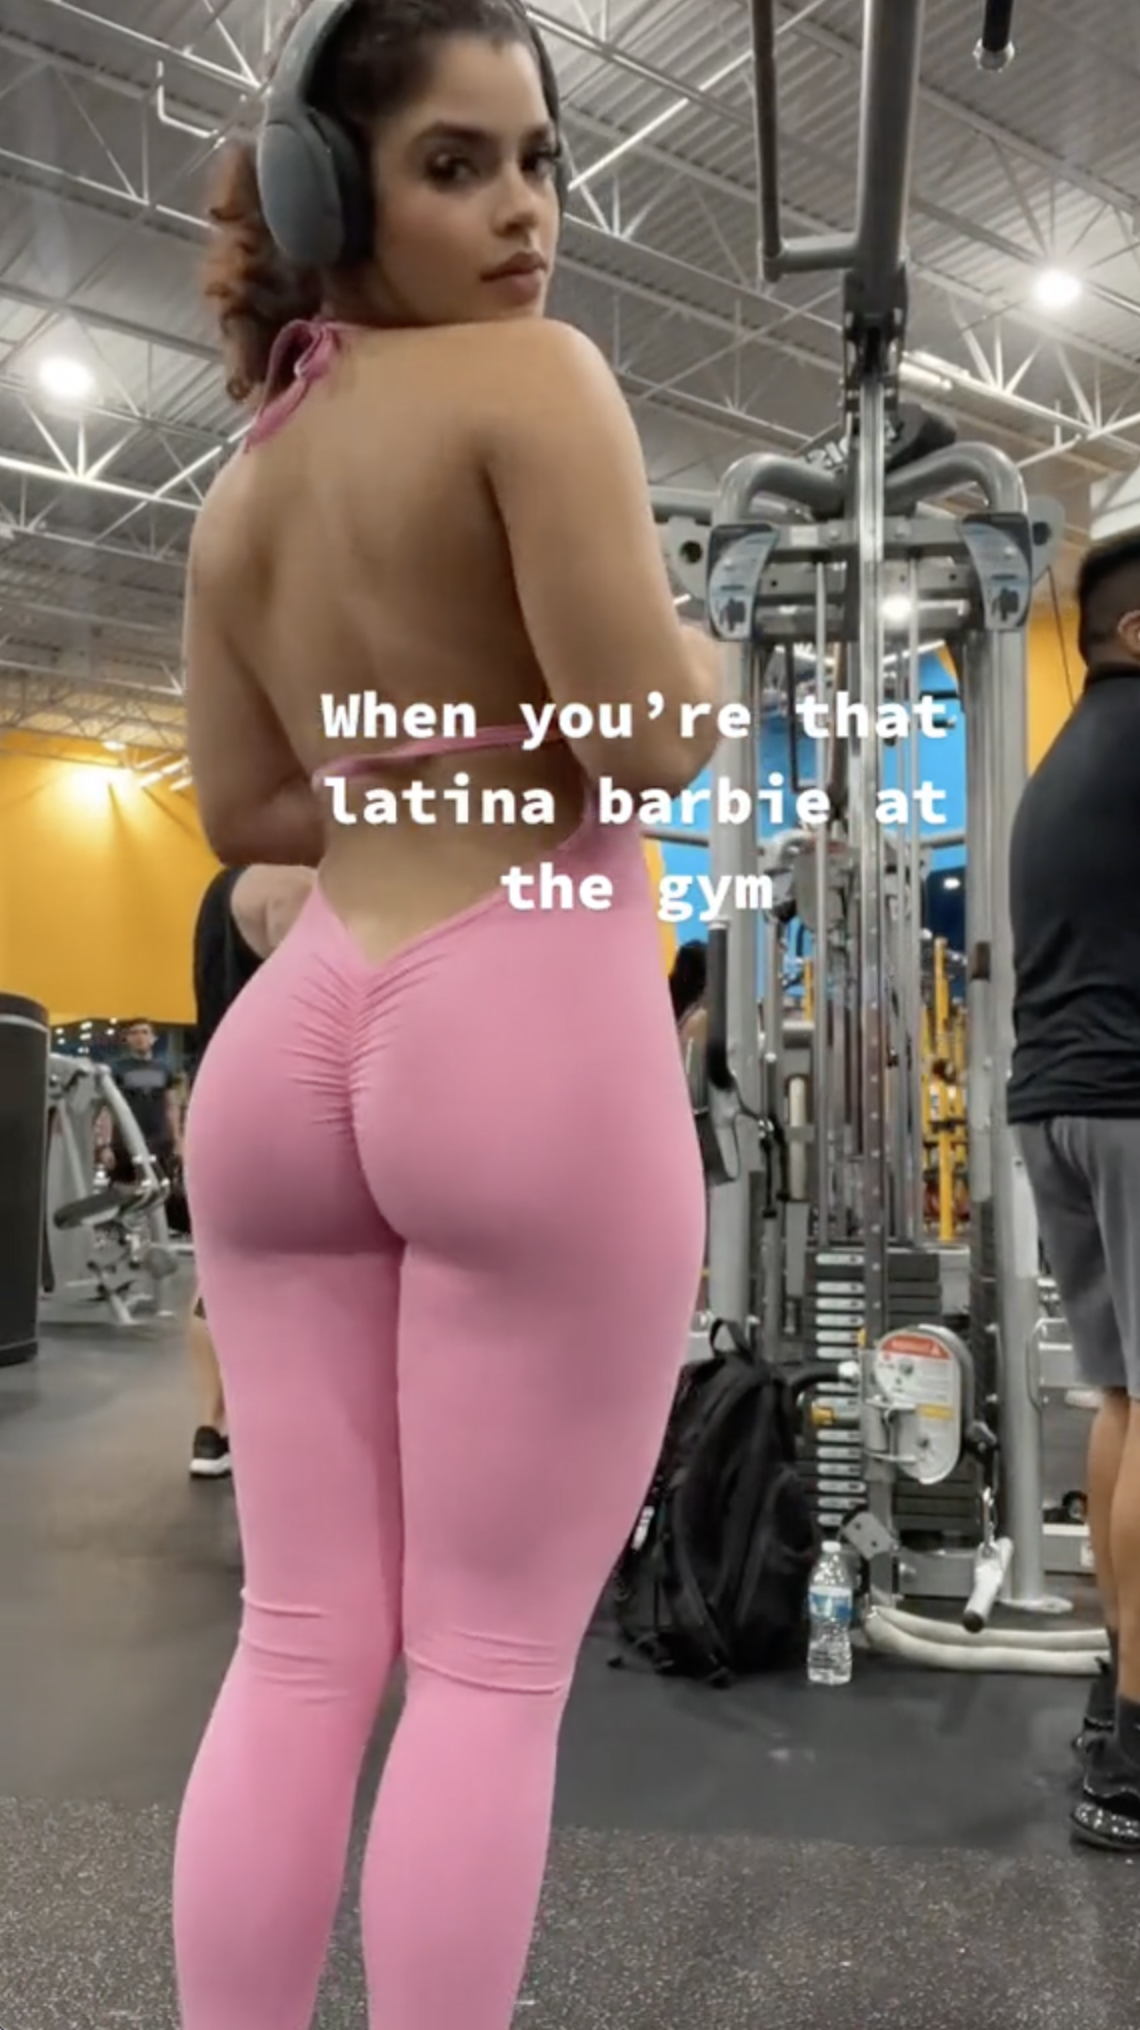 amany ibrahim recommends big latin booty pics pic